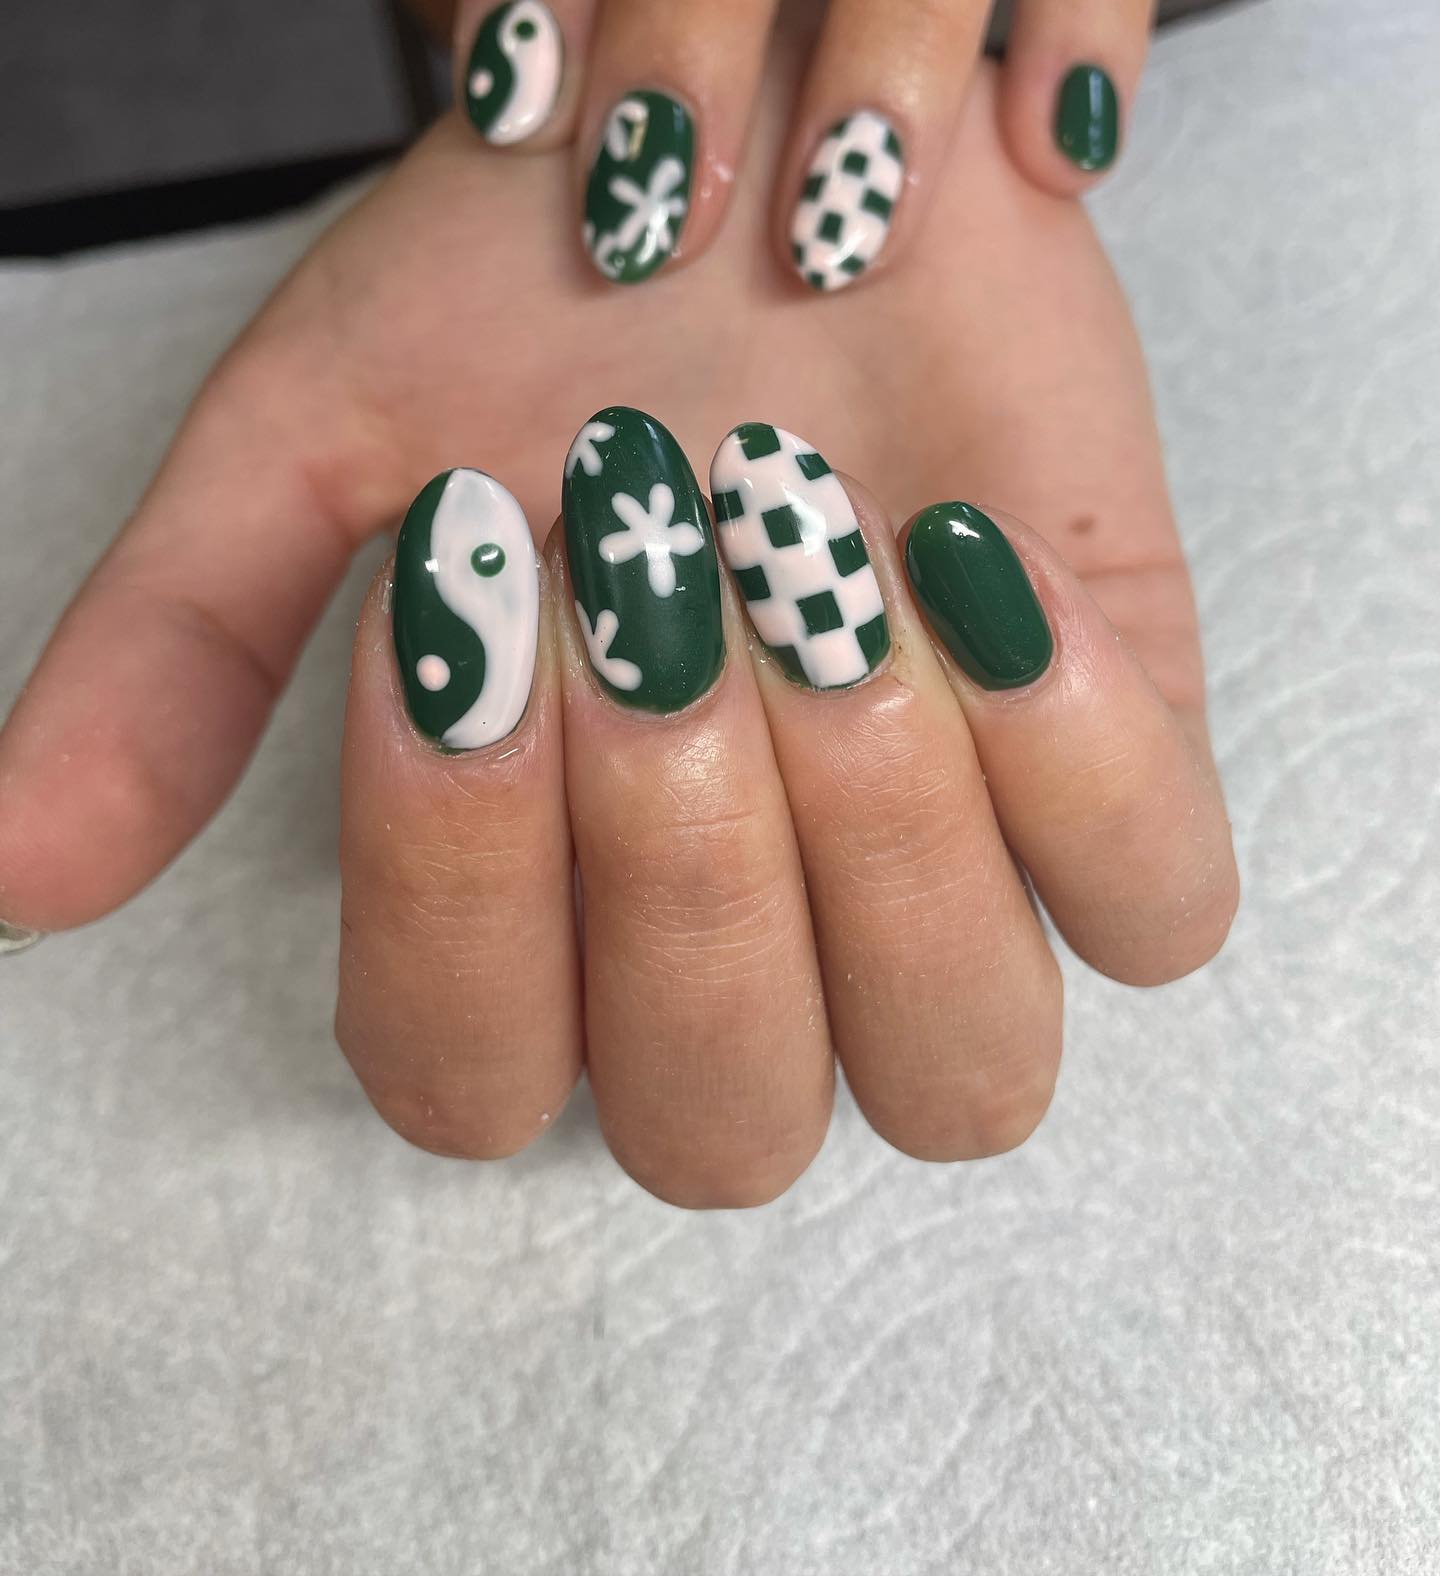 Who can say no to a mixture of dama, flowers and ying yang nails? You will definitely have a different style with this. White nail polish suits well with dark green, too.